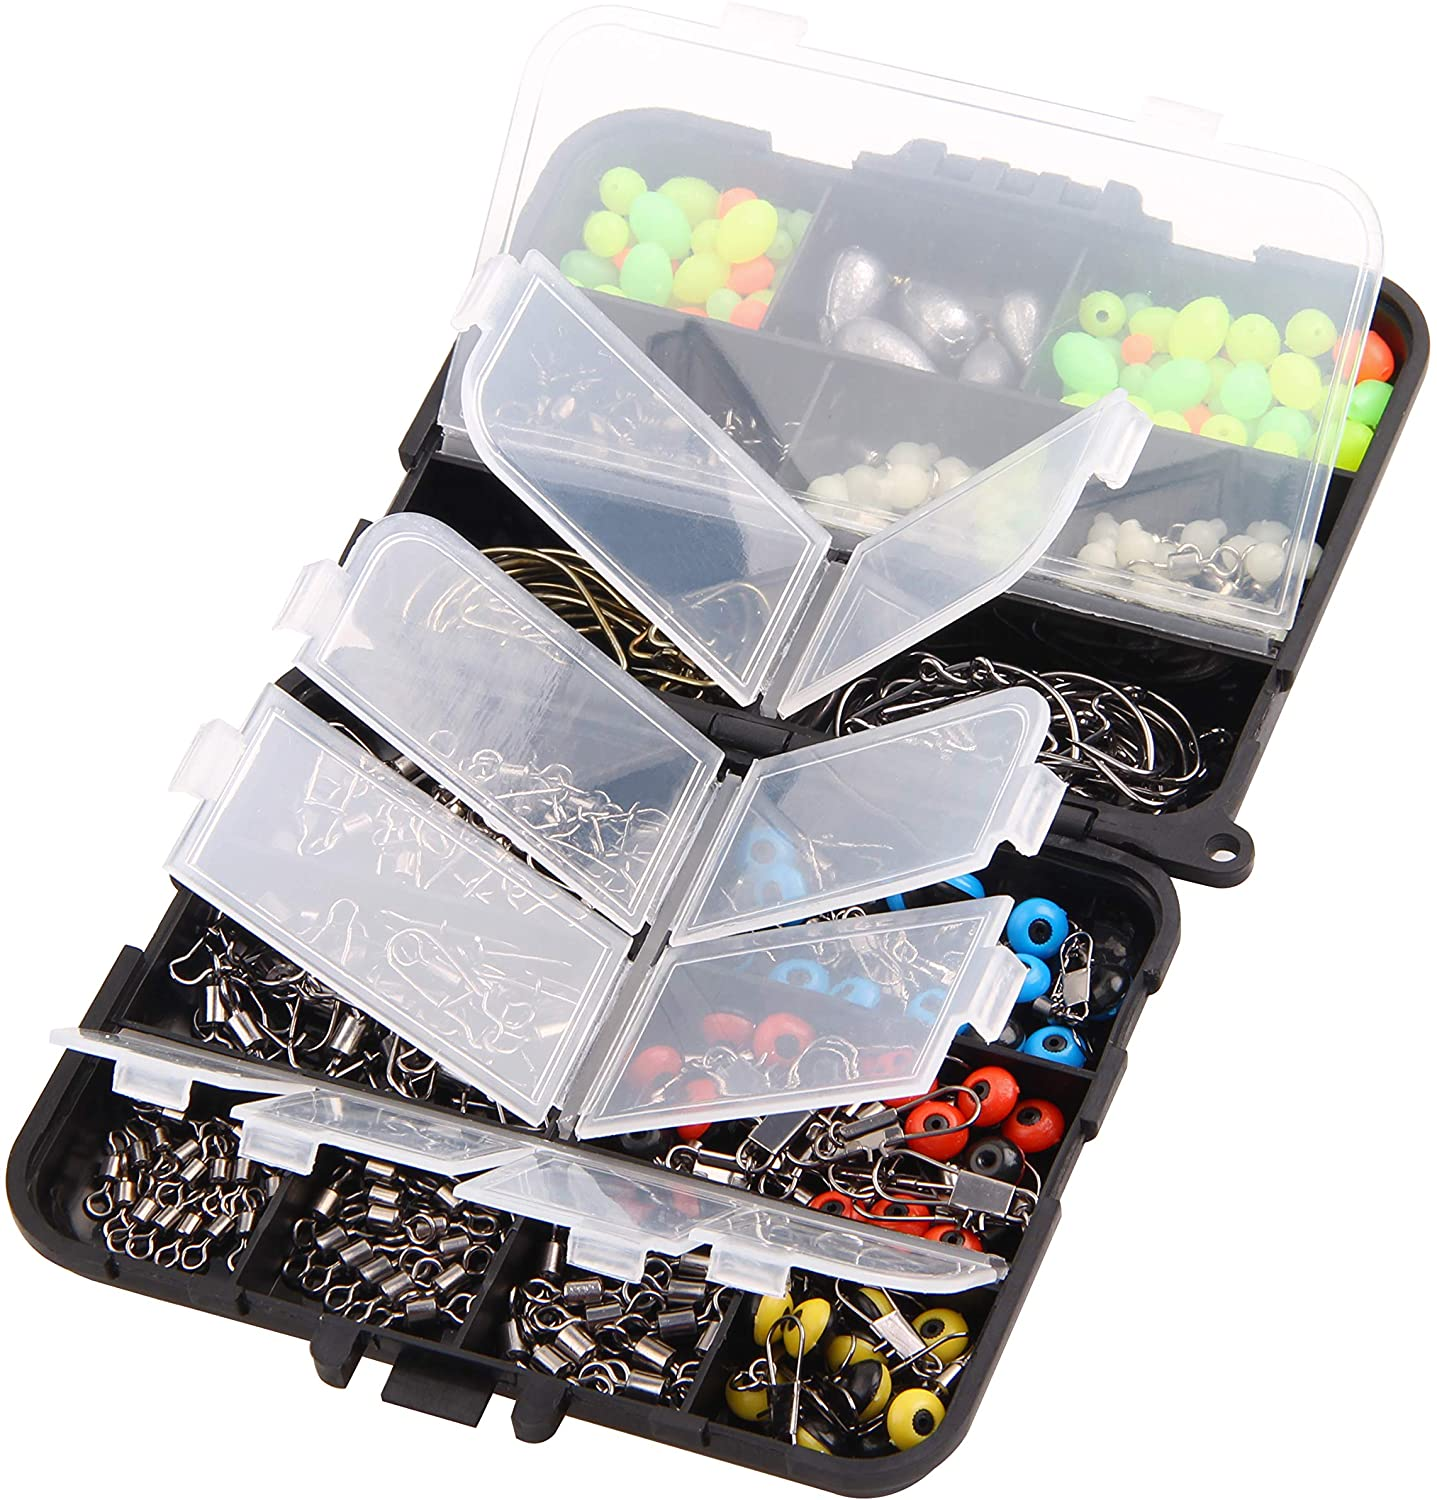 Swivels Fishing Tackle Kit, Fishing Tackle Box with Tackle Included Barrel Swivel Snaps, Sinker Slides, Jig Hooks, Fishing Beads Fishing Accessories Terminal Tackles for Freshwater Saltwater